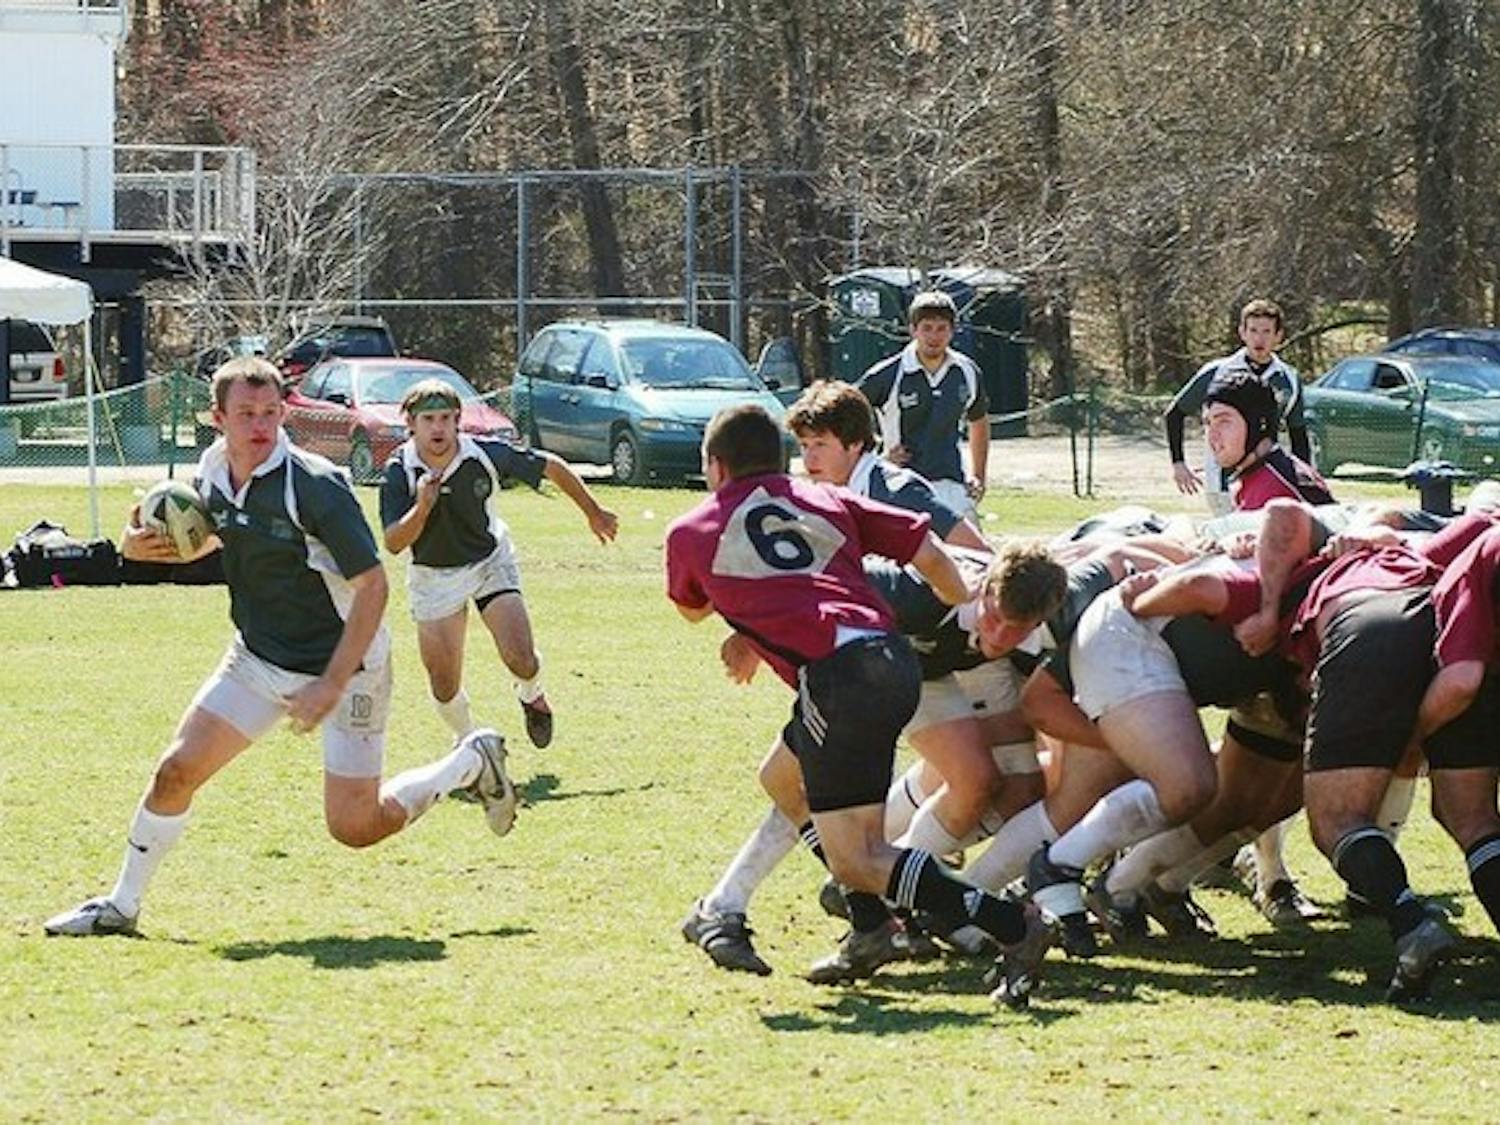 After trouncing Harvard 52-16 Sunday, the Dartmouth Rugby Football Club won the Ivy League championship for the seventh time in nine years.